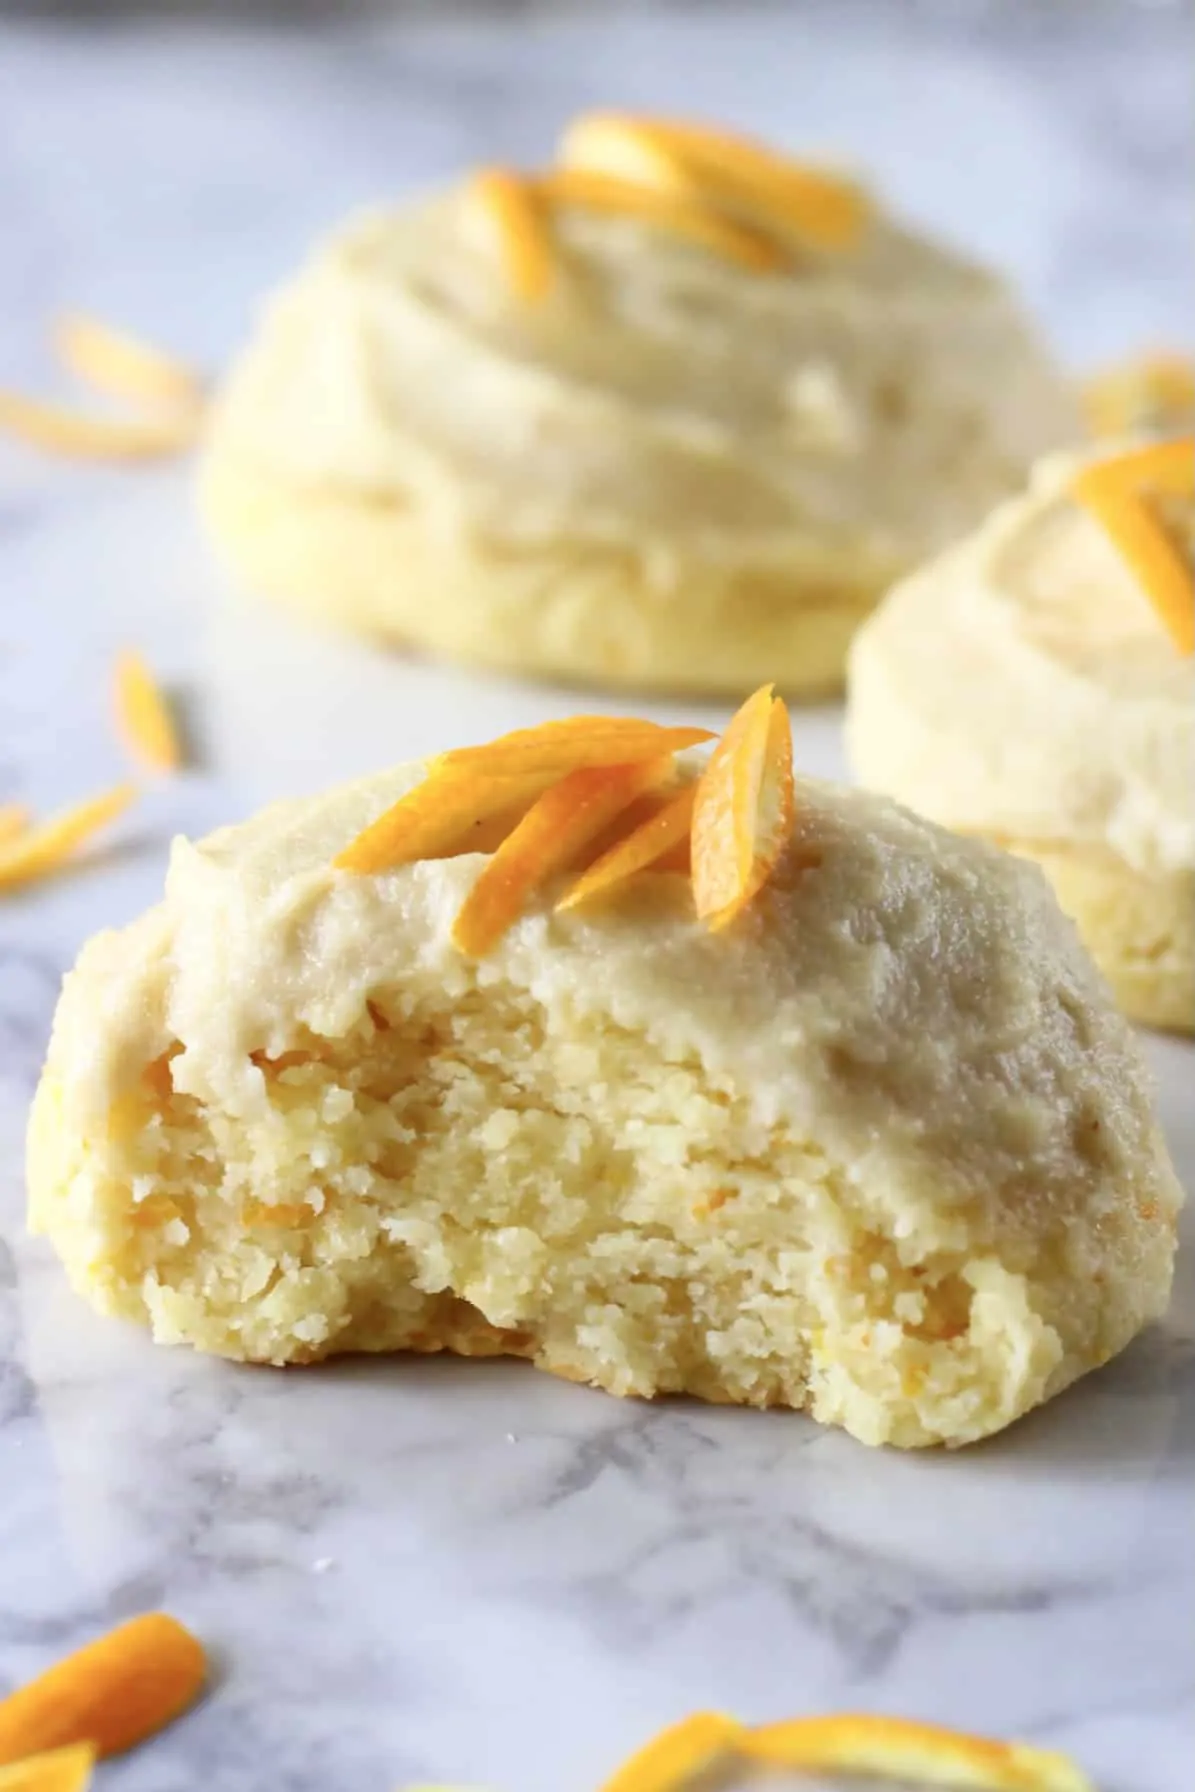 Three orange cookies with frosting and orange zest with a bite taken out of one